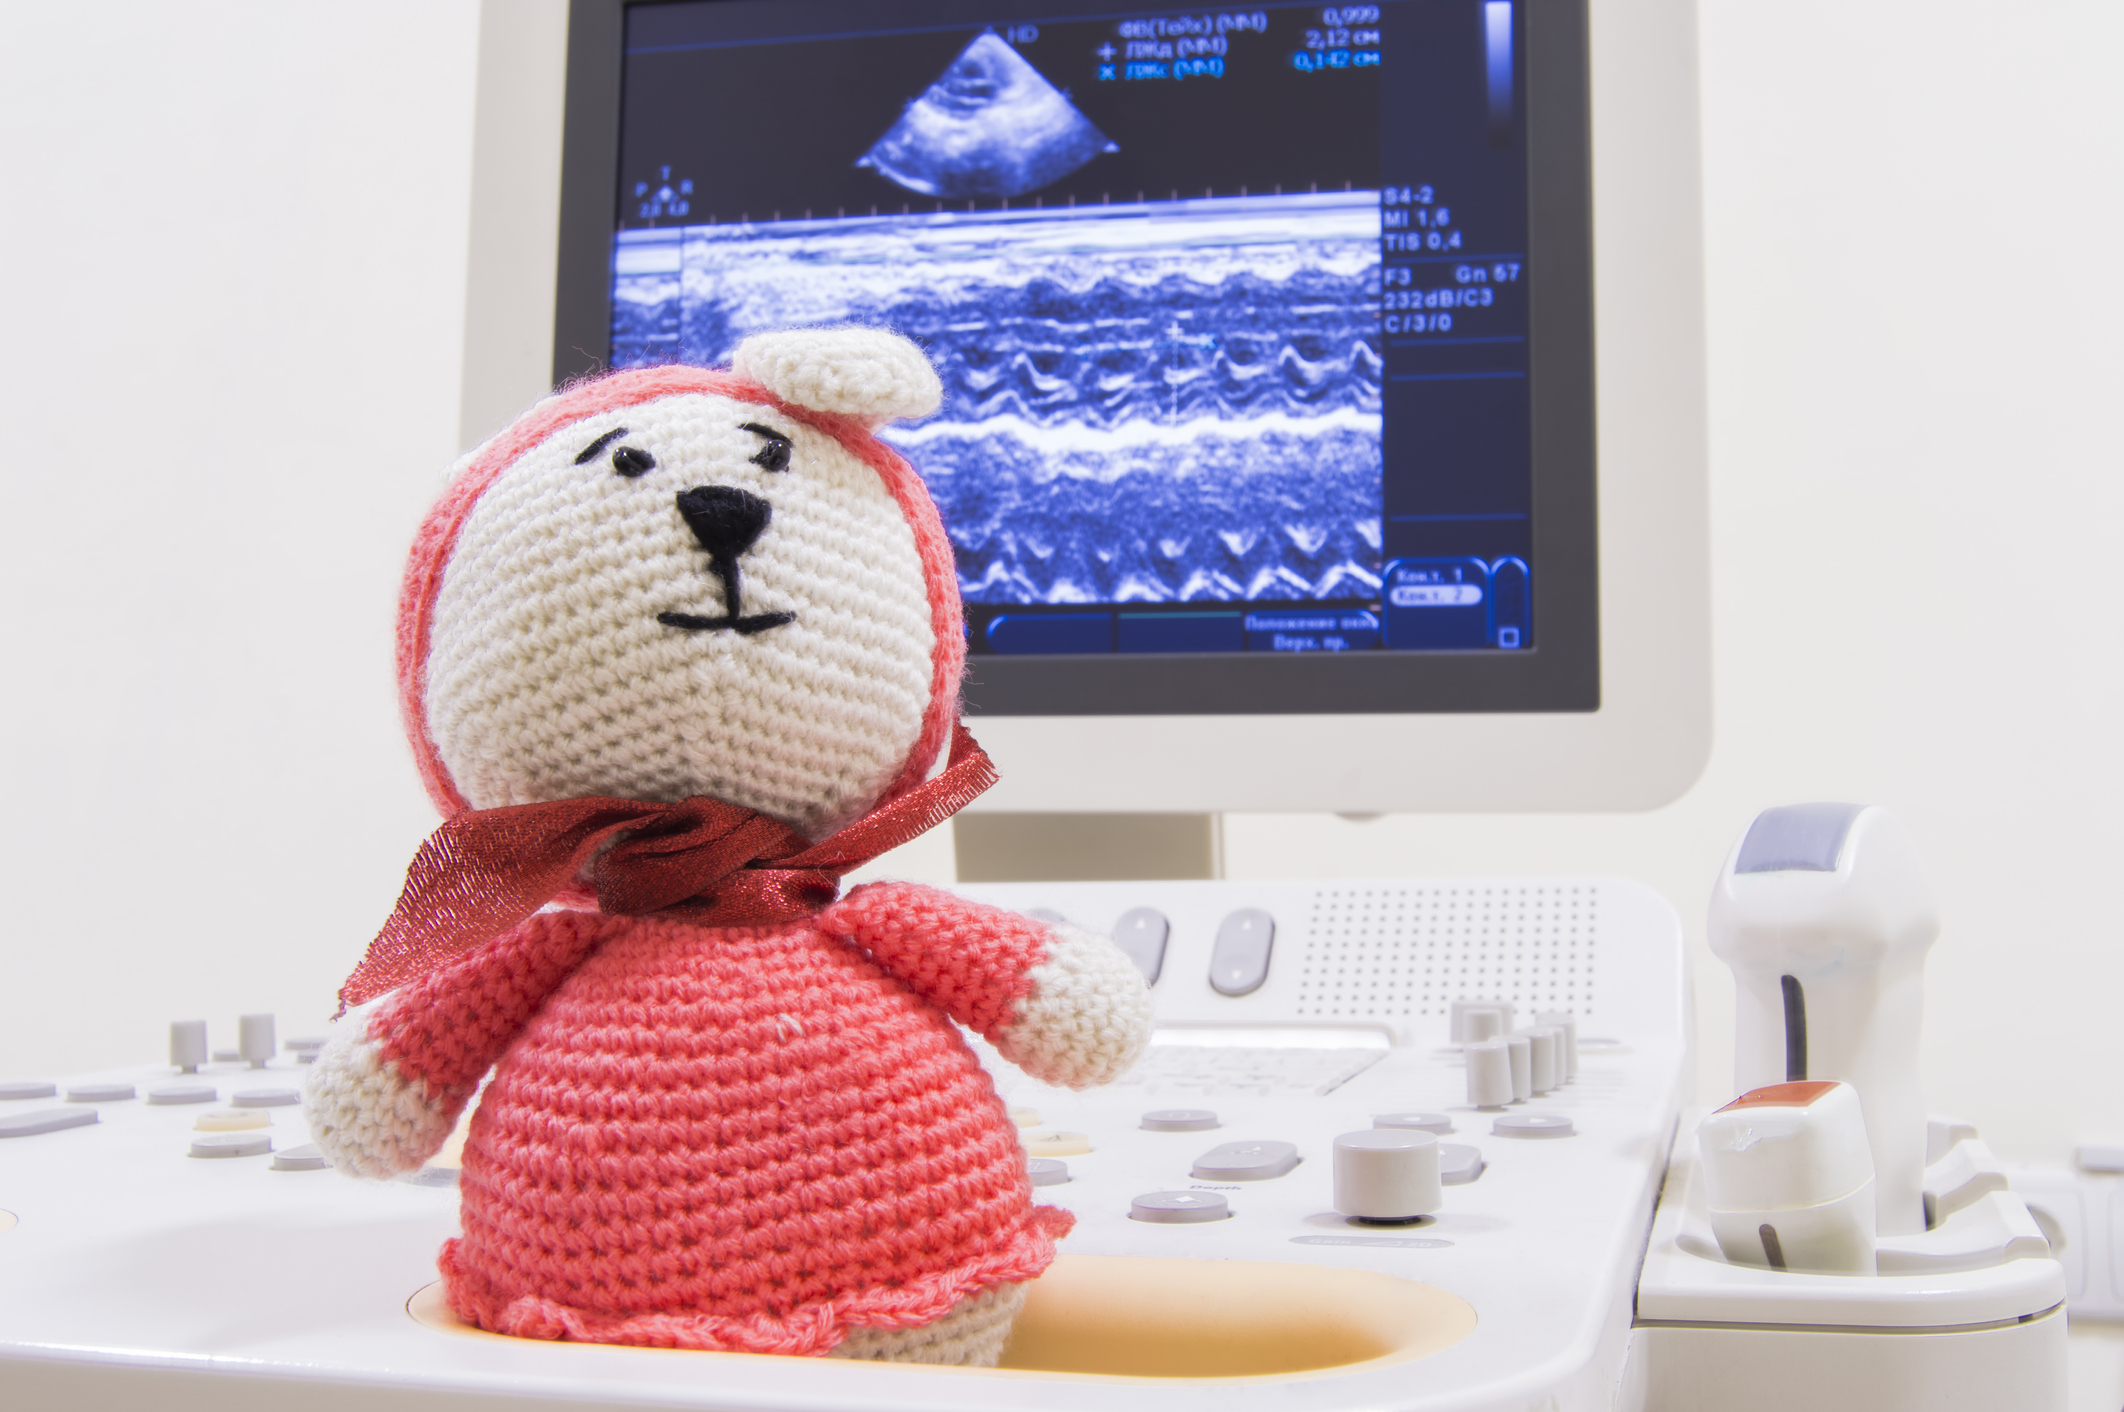 Medical ultrasound scanner and children toy knitted bunny on screen background with waves ECHO heart test or scan and ultrasonic probes. 